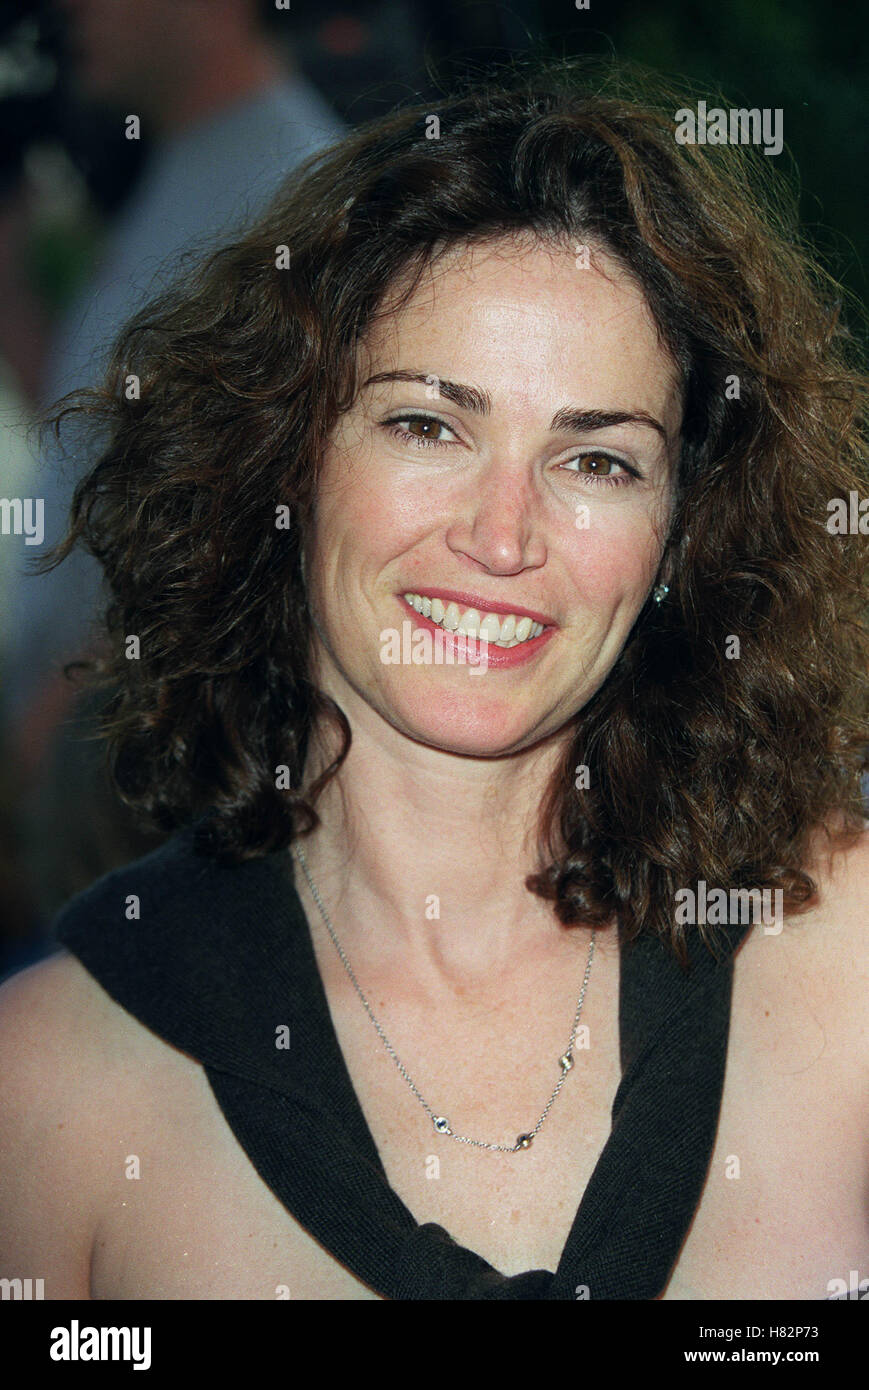 KIM DELANEY 'FAST AND FURIOUS' FILM PREMIERE LOS ANGELES USA 18 June 2001 Stock Photo